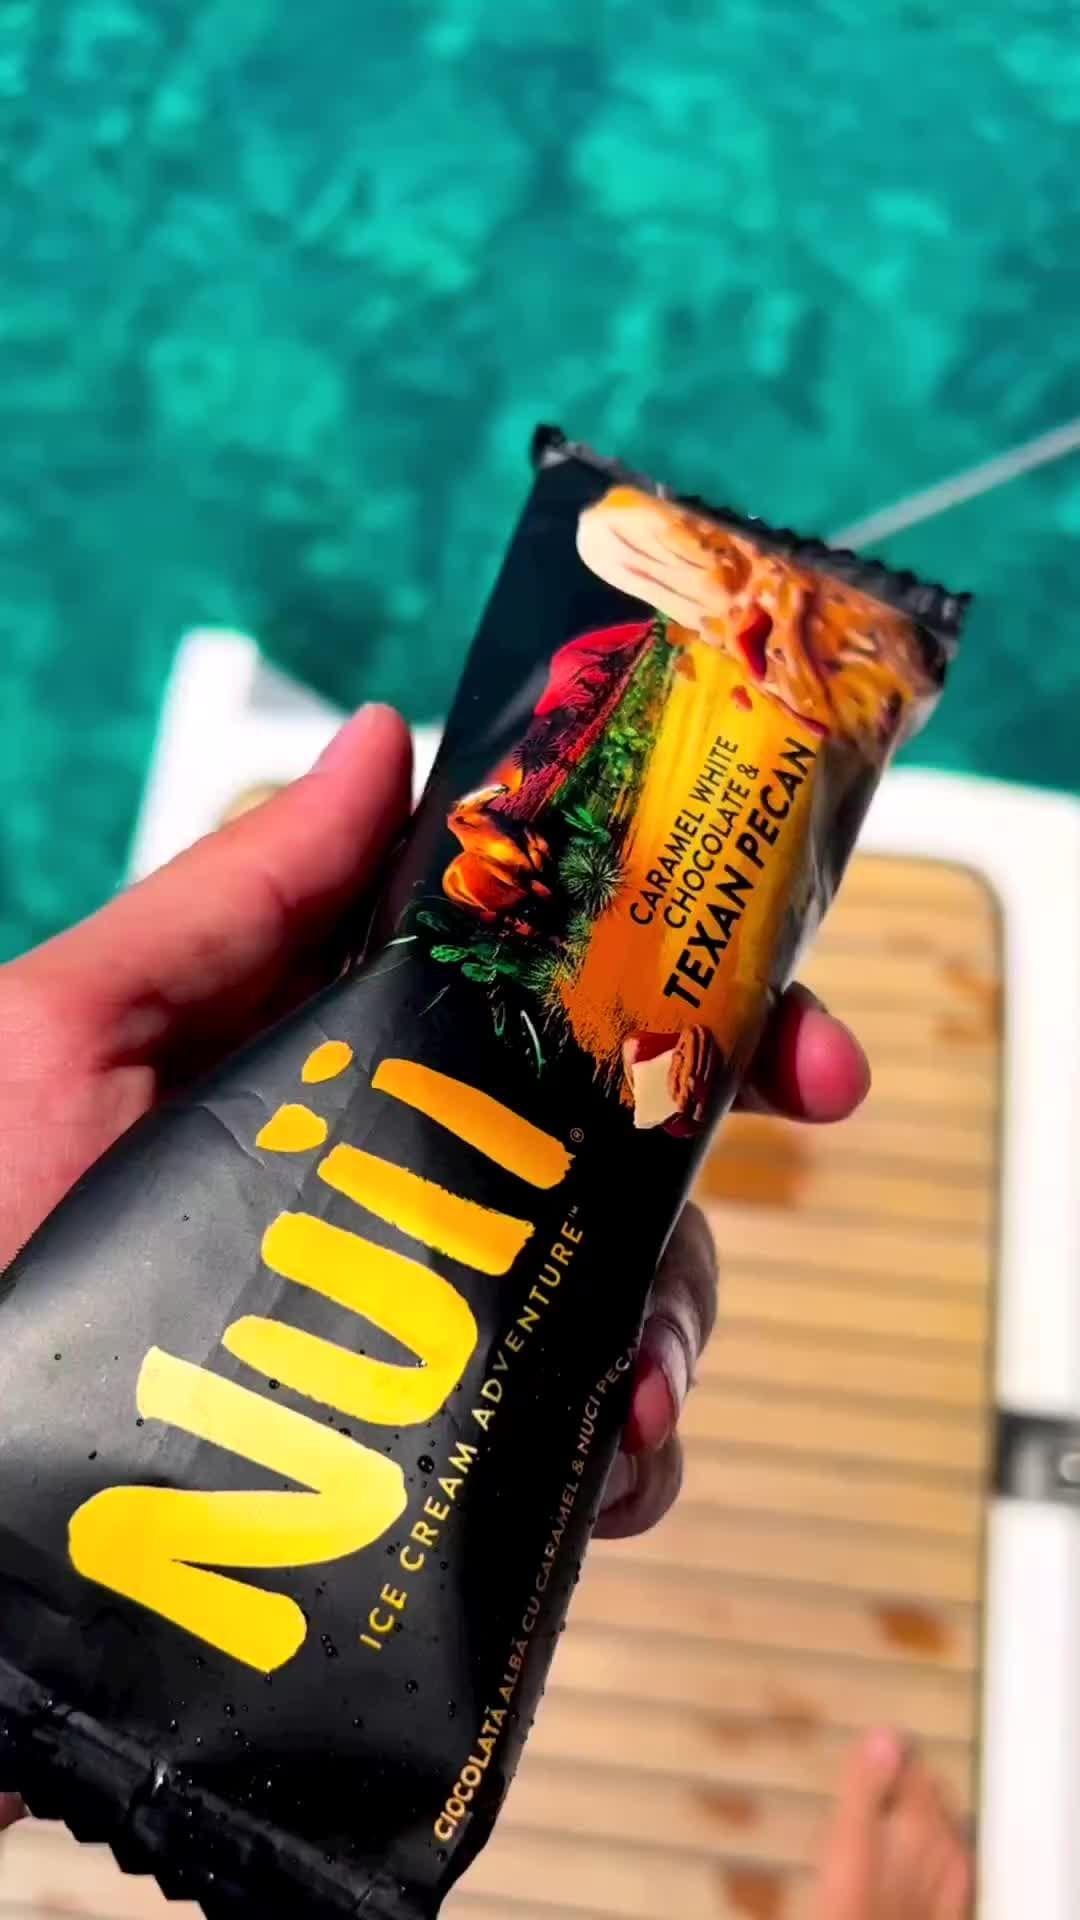 class="content__text"
 In one of the most beautiful places in Cyprus, the blue lagoon in the Akama National Park, @xenofontos_life 's group couldn't resist bringing along their favourite NUII ice cream. 🍦 
 